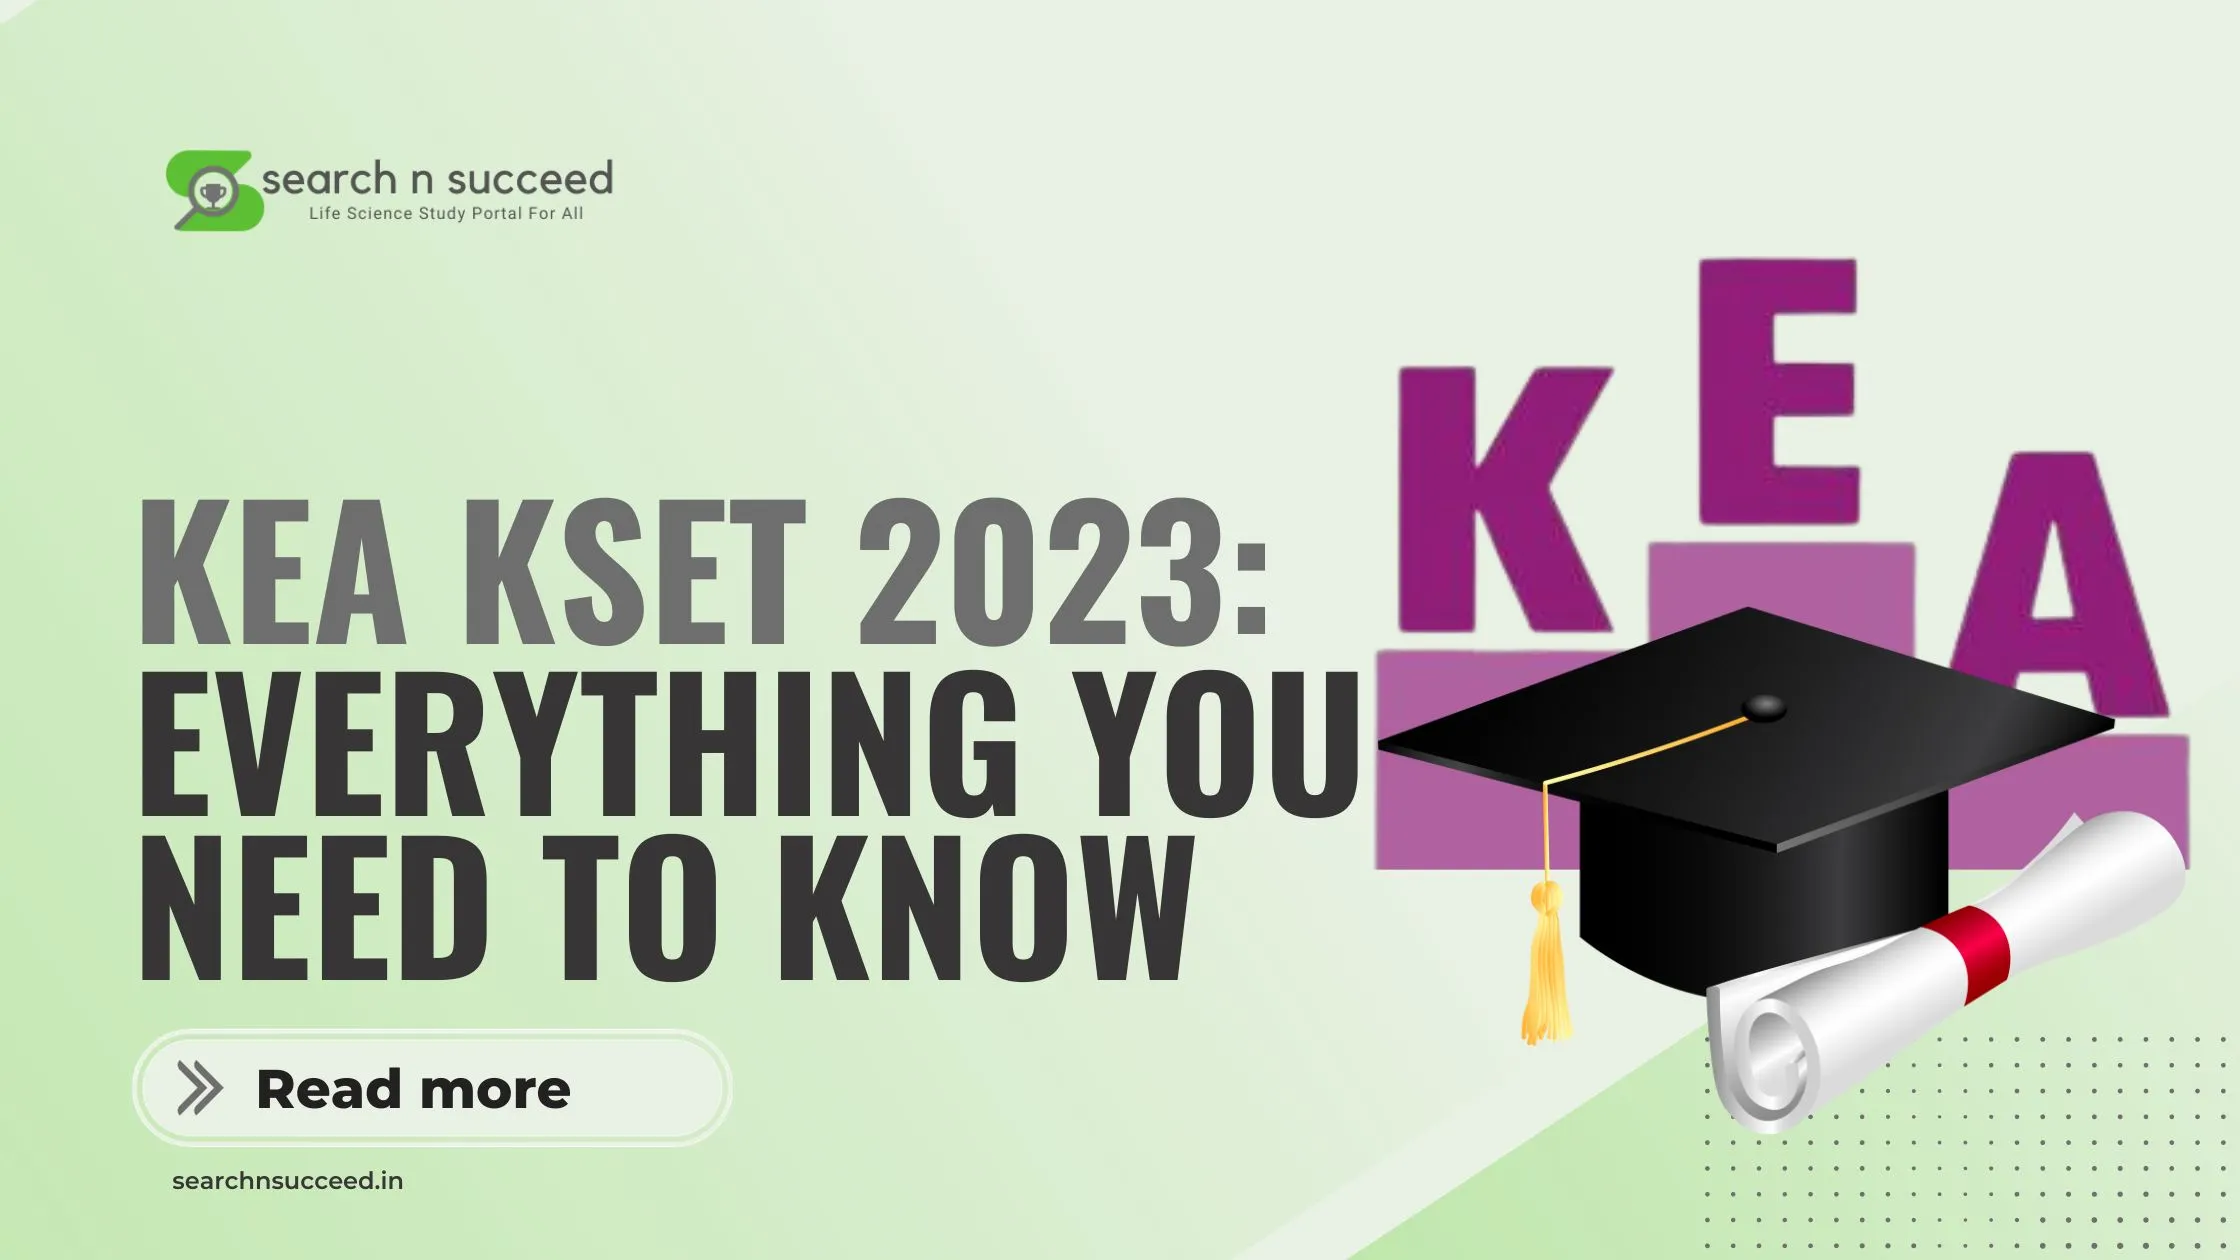 KEA KSET 2023: Everything You Need to Know